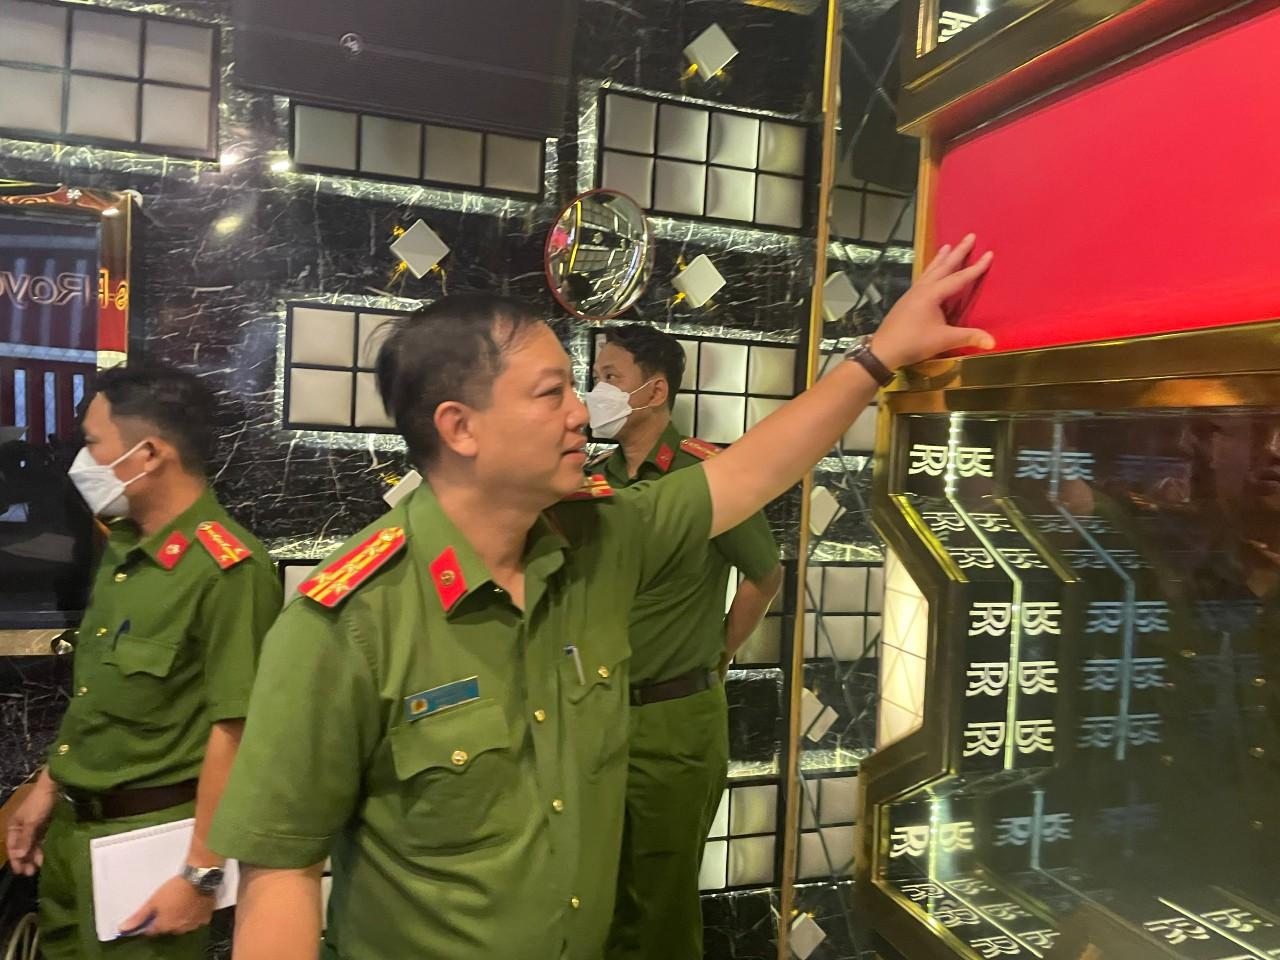 Police officers examine fire safety system at a karaoke parlor in Ho Chi Minh City. Photo: PC07